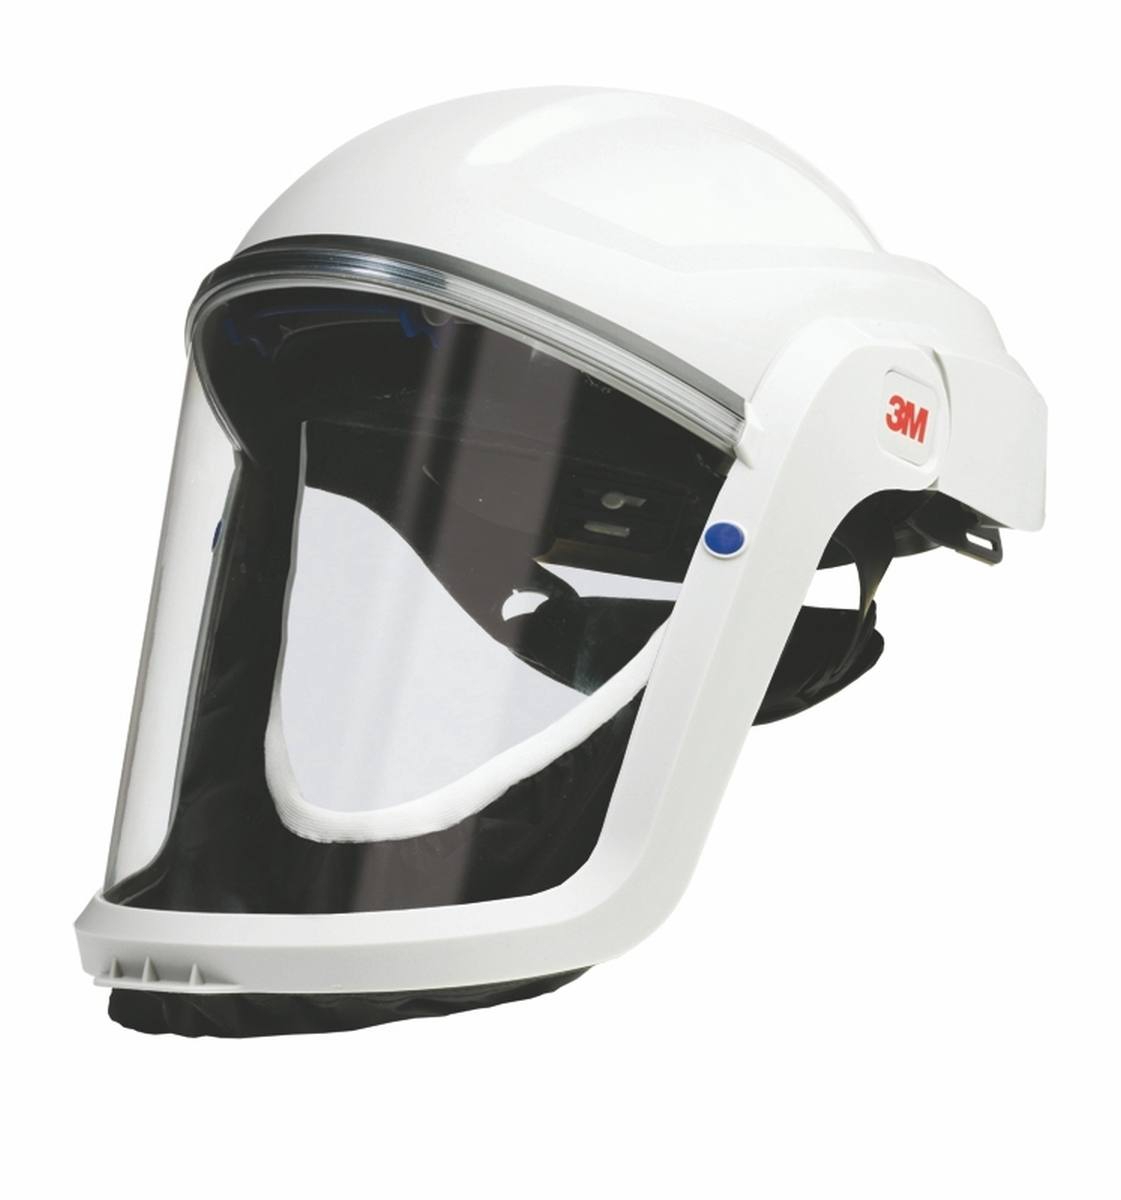 3M TR-819E IS Versaflo starter pack explosion protection incl. TR-802E, accessories and 3M Versaflo Safety helmet M206 with comfort face seal and polycarbonate visor, clear